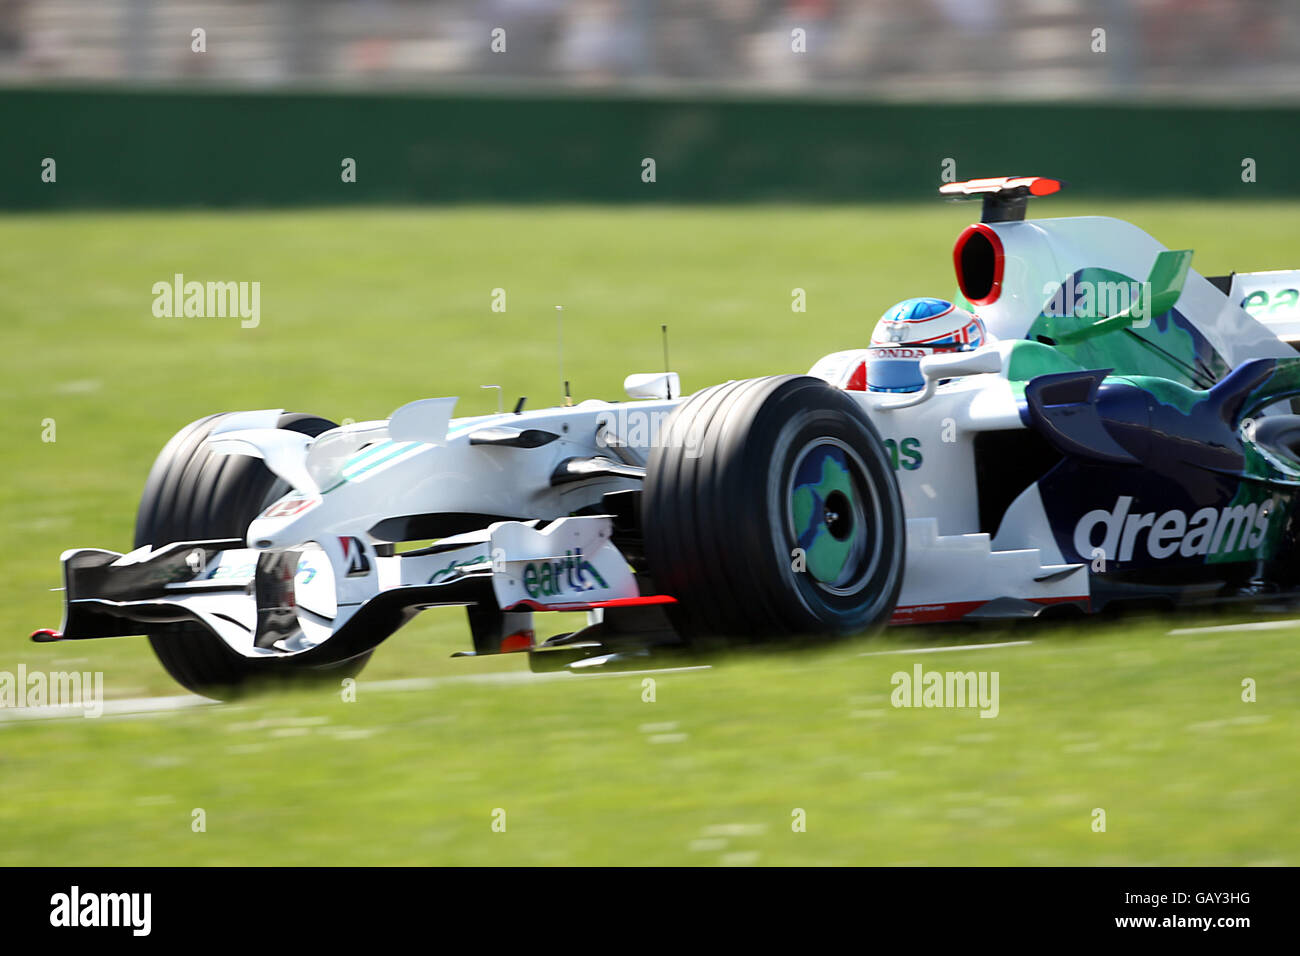 Honda's Jenson Button during qualifying for the Grand Prix at Magny-Cours, Nevers, France. Stock Photo